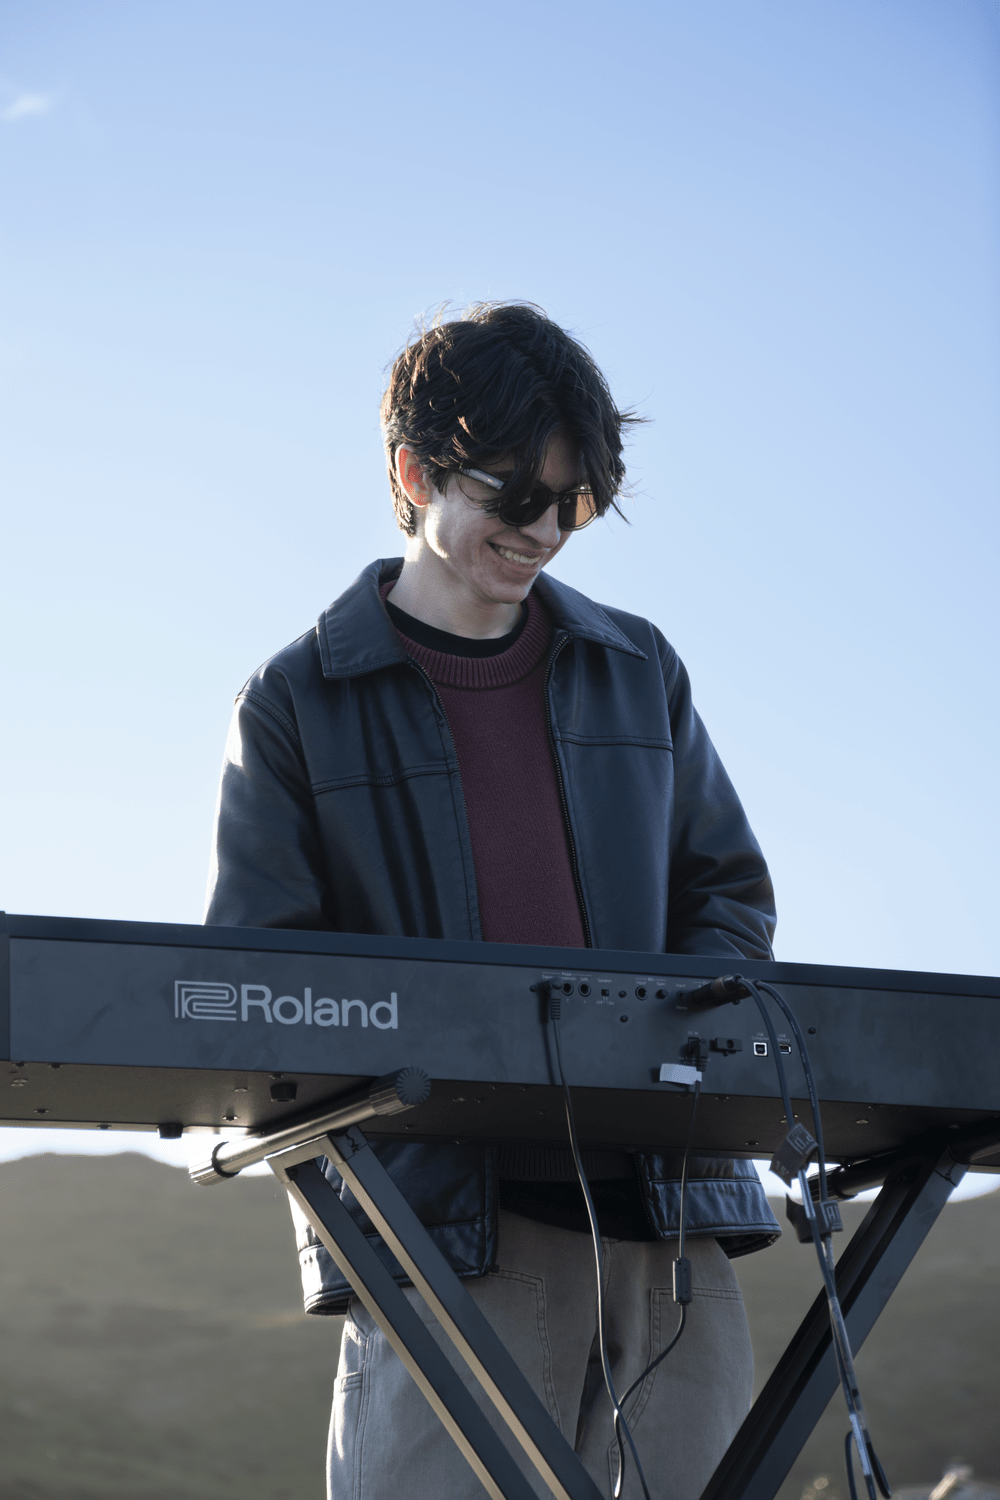 Junior Evan Herrera plays keyboards in the Press Play Septet March 23 performance at Alumni Park. Herrera helped form the student band.